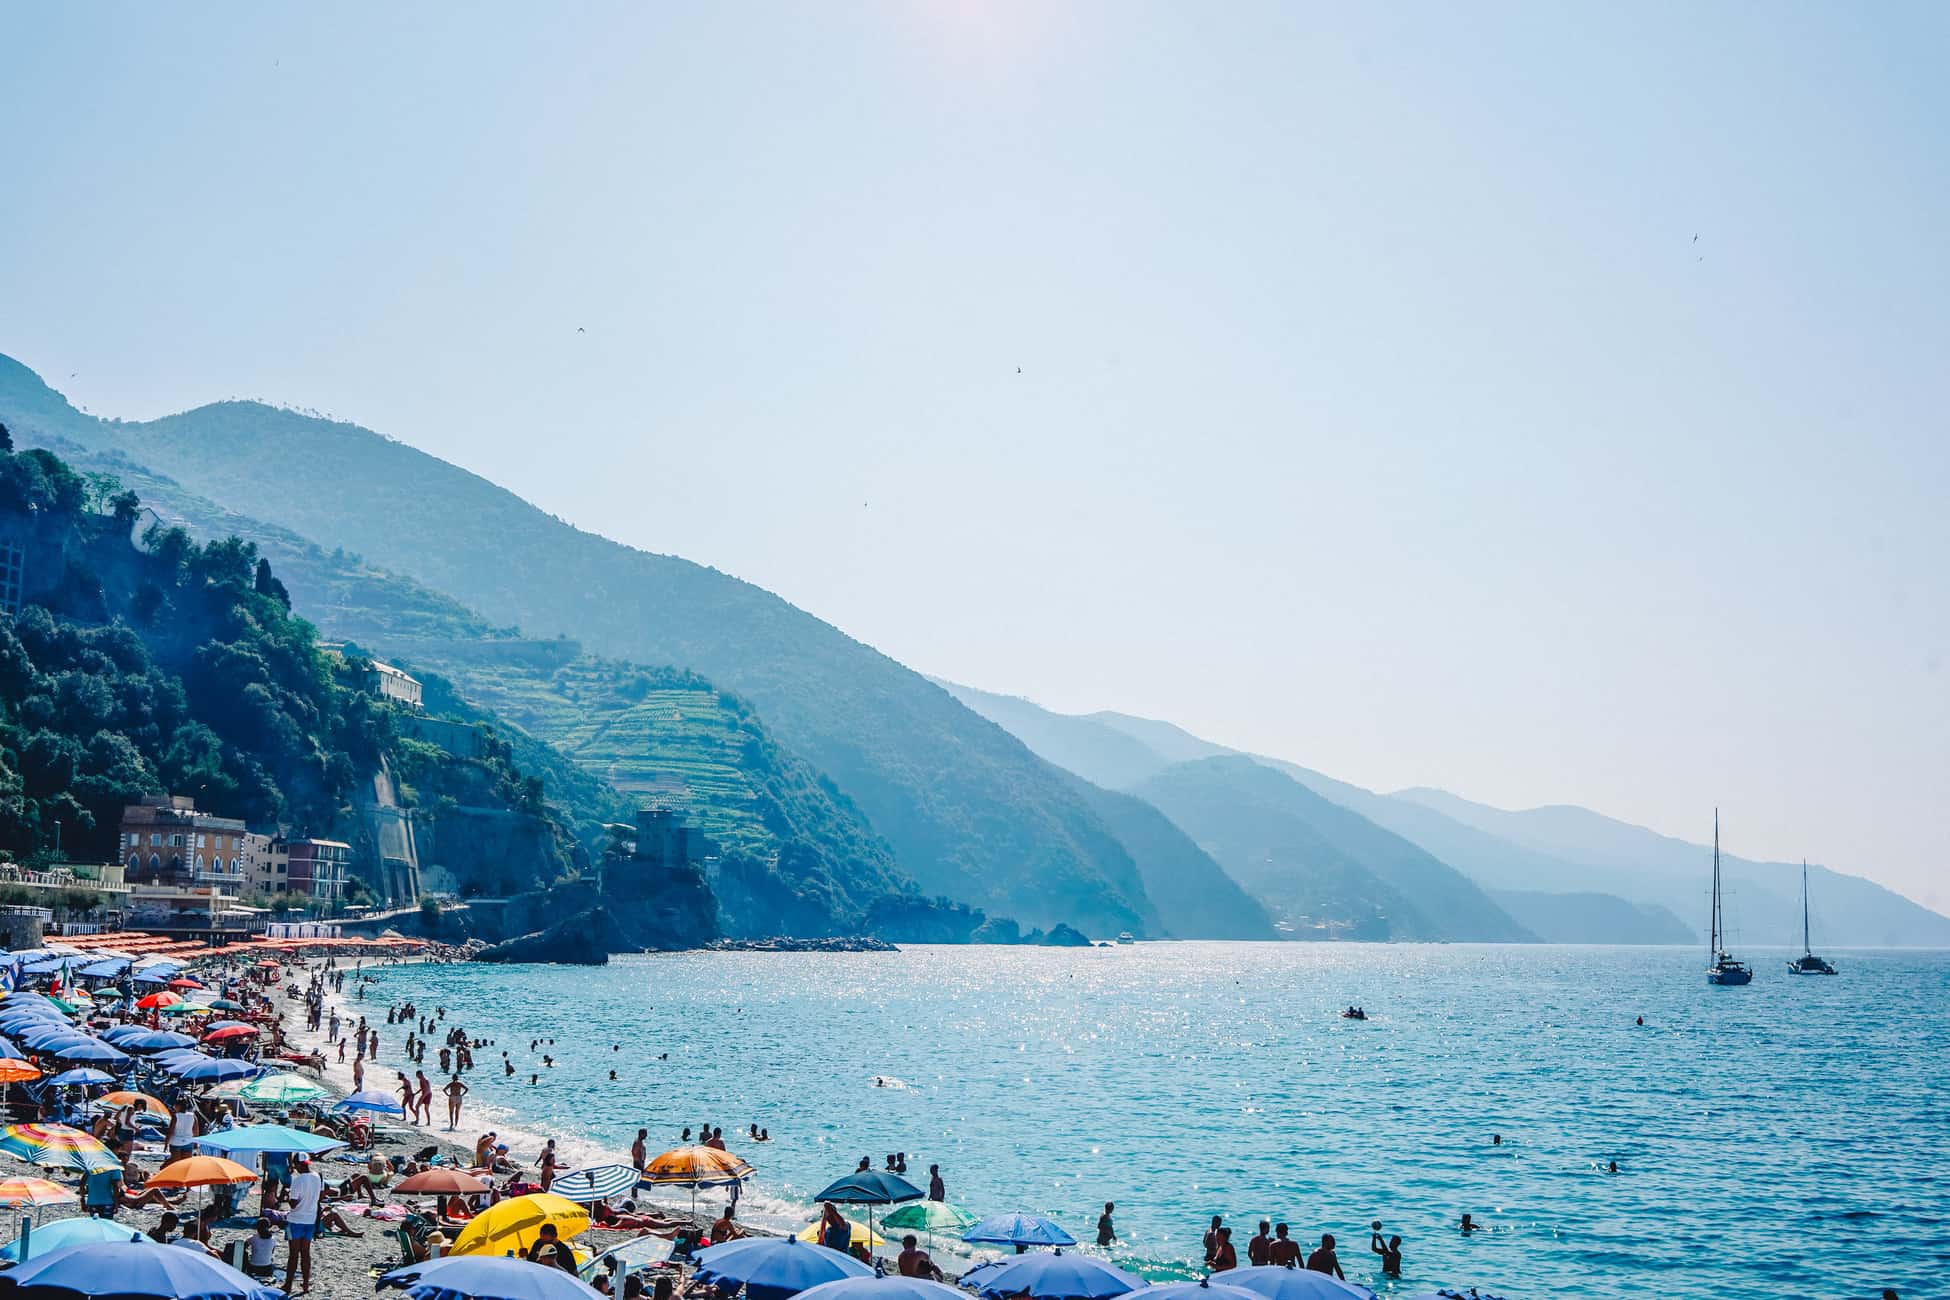 Italy Honeymoon Itinerary: 10 days in Cinque Terre, Florence & Rome